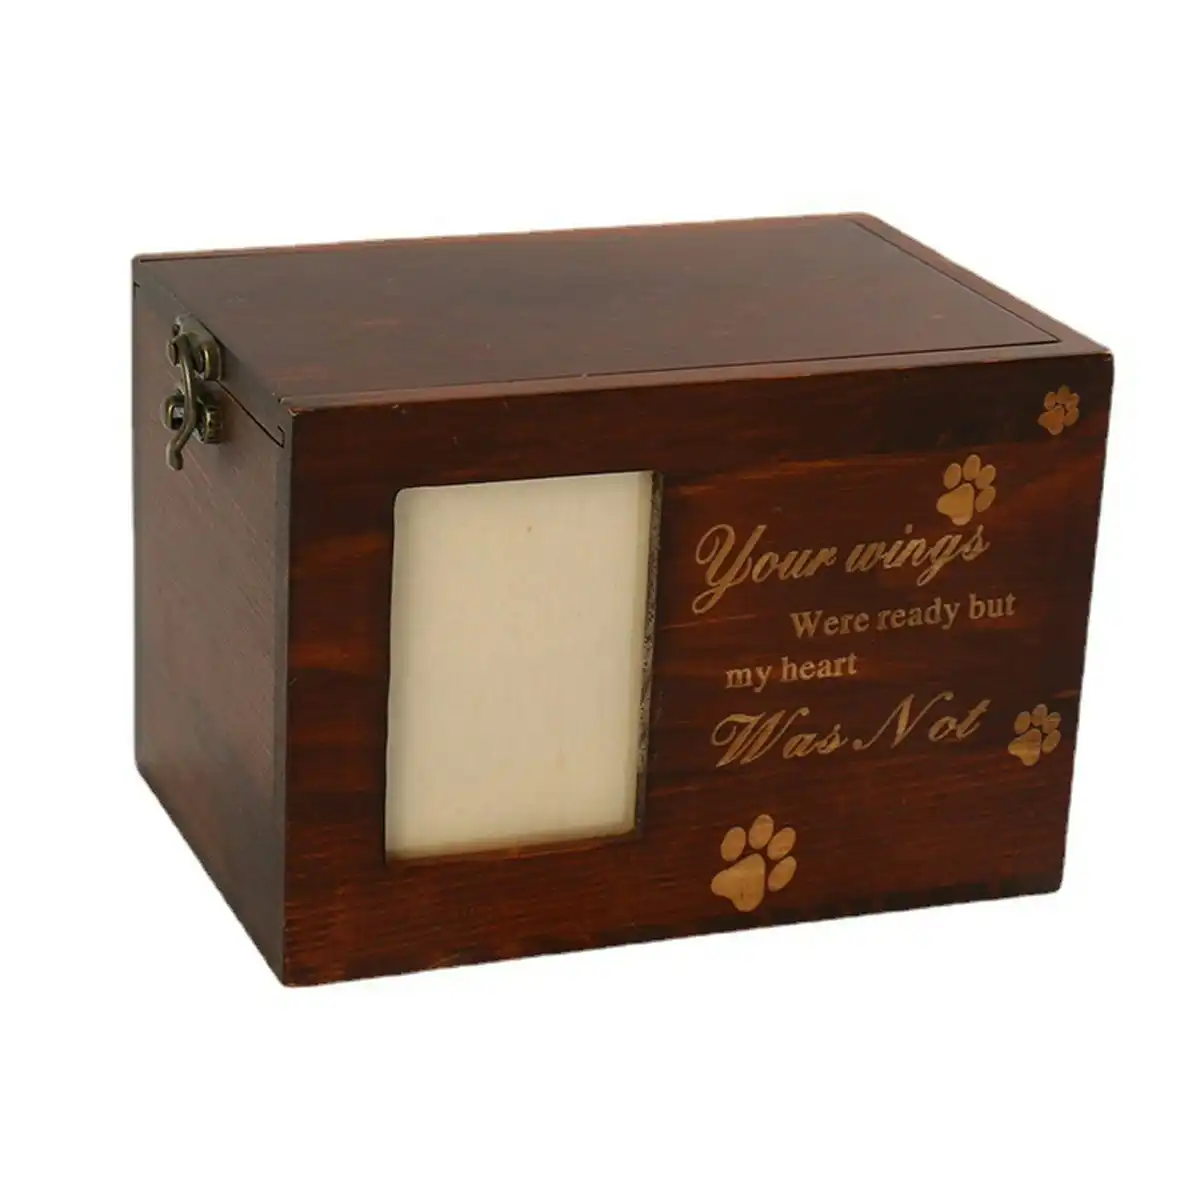 1x Wooden Pet Memorial Urn For Ashes With Photo Frame Cat/Dog Memory Box Keepsak